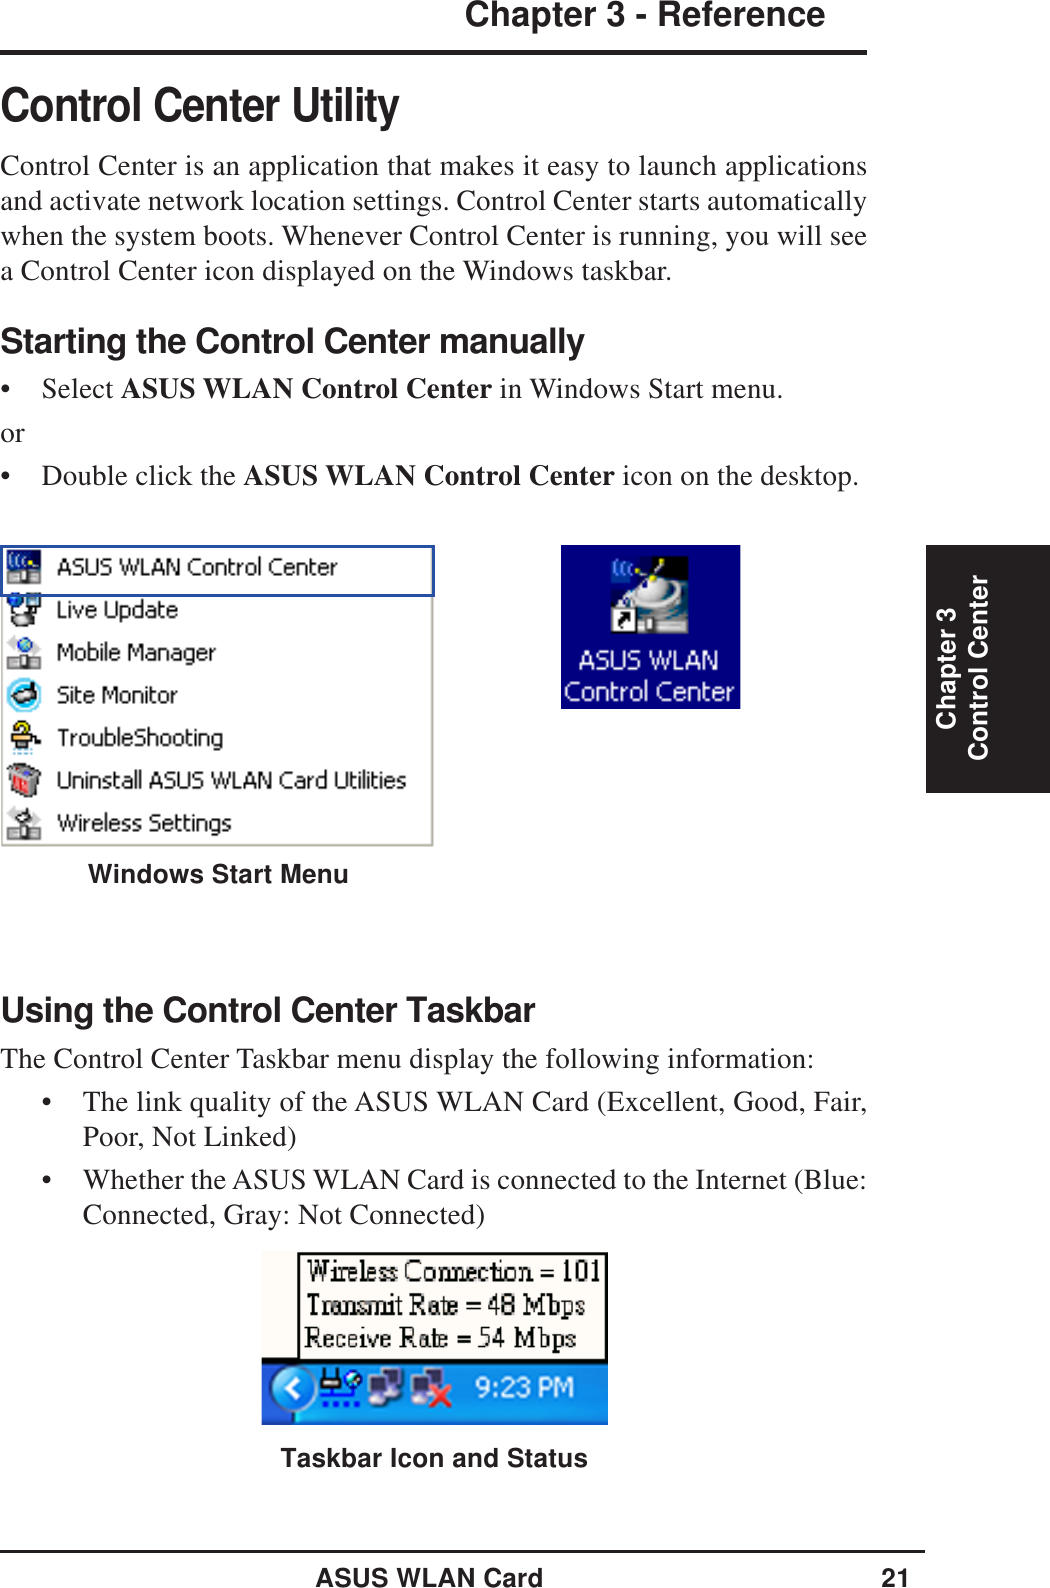 ASUS WLAN Card 21Chapter 3 - ReferenceChapter 3Control CenterControl Center UtilityControl Center is an application that makes it easy to launch applicationsand activate network location settings. Control Center starts automaticallywhen the system boots. Whenever Control Center is running, you will seea Control Center icon displayed on the Windows taskbar.Starting the Control Center manually• Select ASUS WLAN Control Center in Windows Start menu.or• Double click the ASUS WLAN Control Center icon on the desktop.Using the Control Center TaskbarThe Control Center Taskbar menu display the following information:• The link quality of the ASUS WLAN Card (Excellent, Good, Fair,Poor, Not Linked)• Whether the ASUS WLAN Card is connected to the Internet (Blue:Connected, Gray: Not Connected)Taskbar Icon and StatusWindows Start Menu